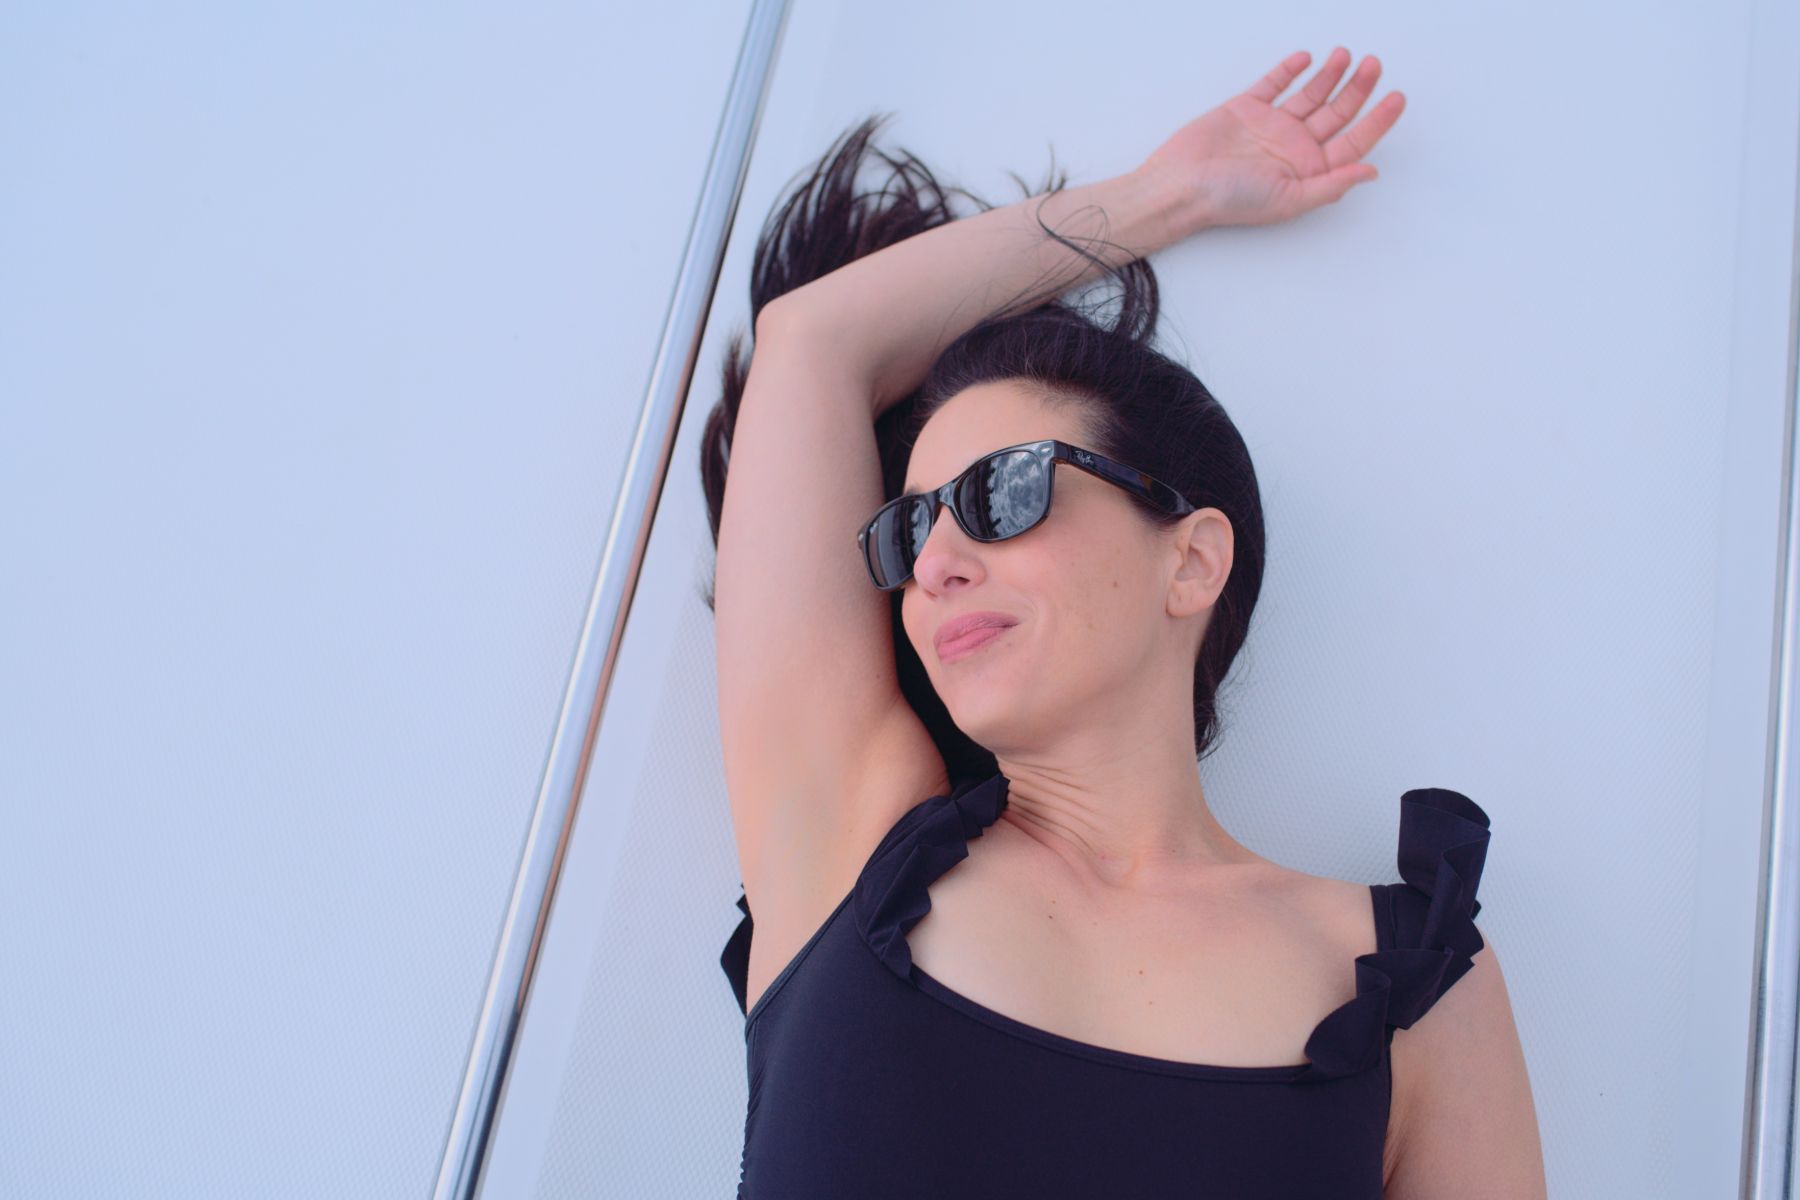 Macken Koya Bay View from above of woman wearing a black bathing suit and sunglasses sunbathing on a white yacht with her arm over her head